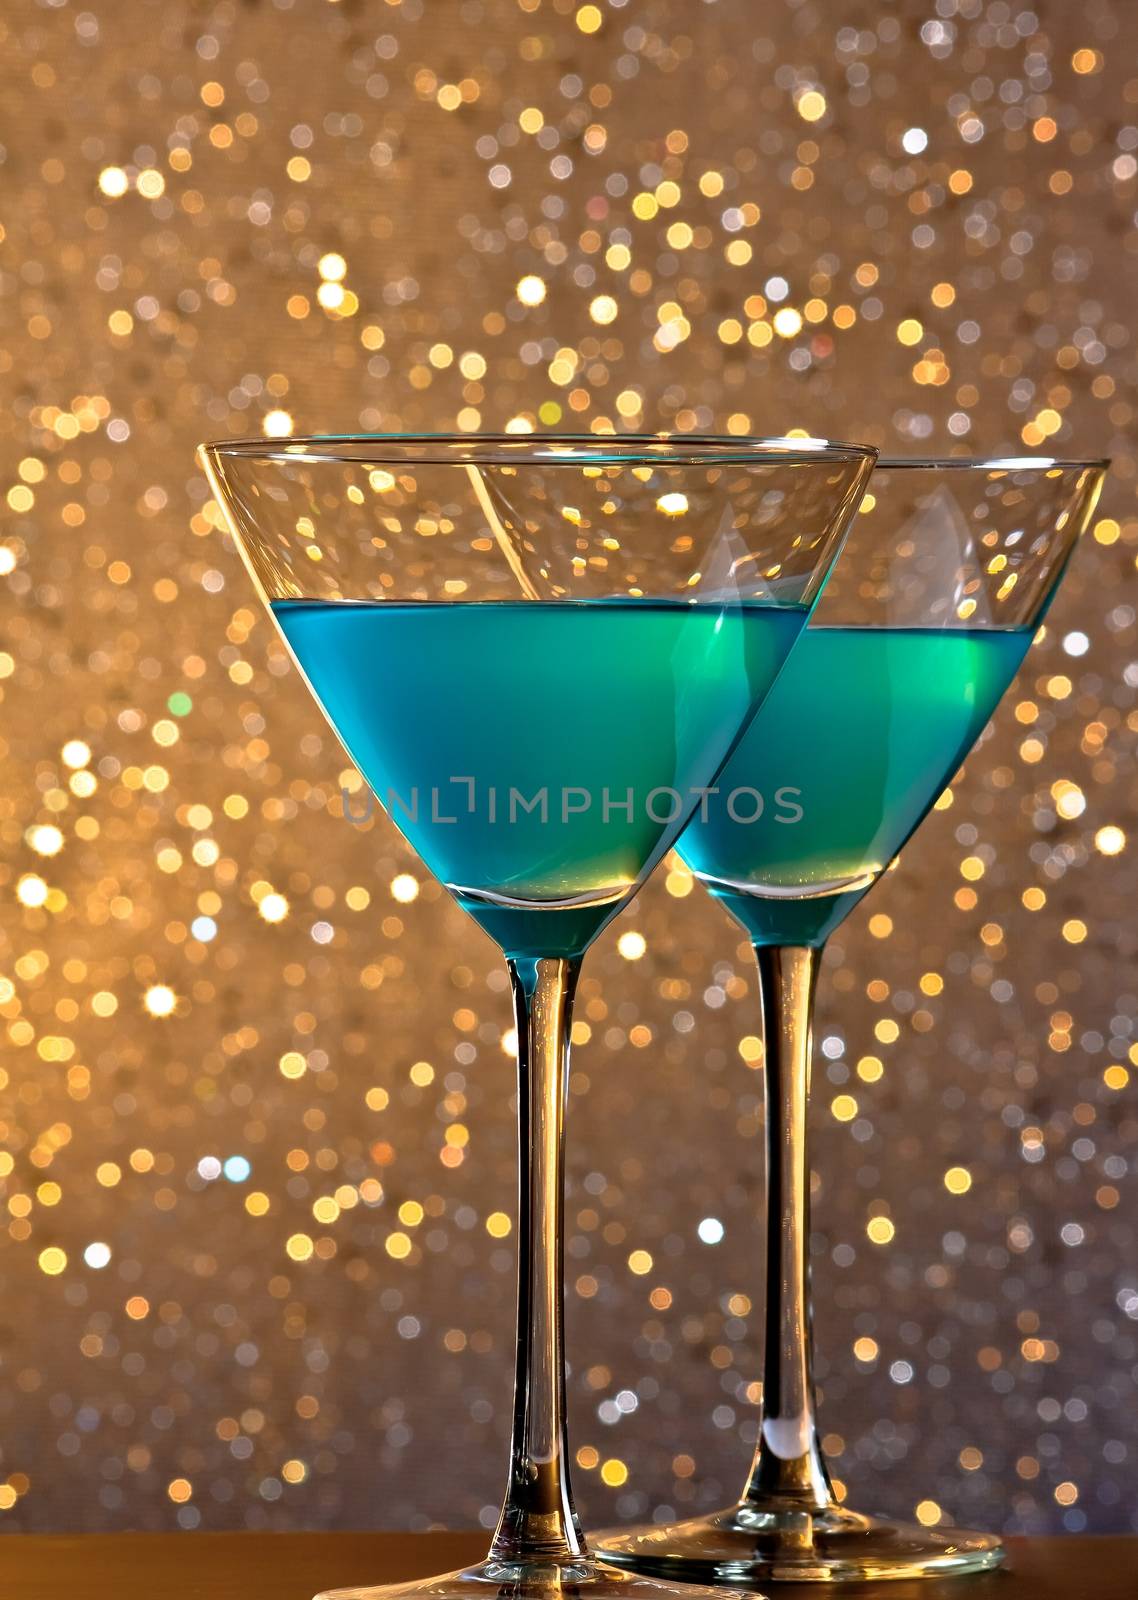 a pair of glasses of blue cocktail on golden tint light bokeh background on bar table